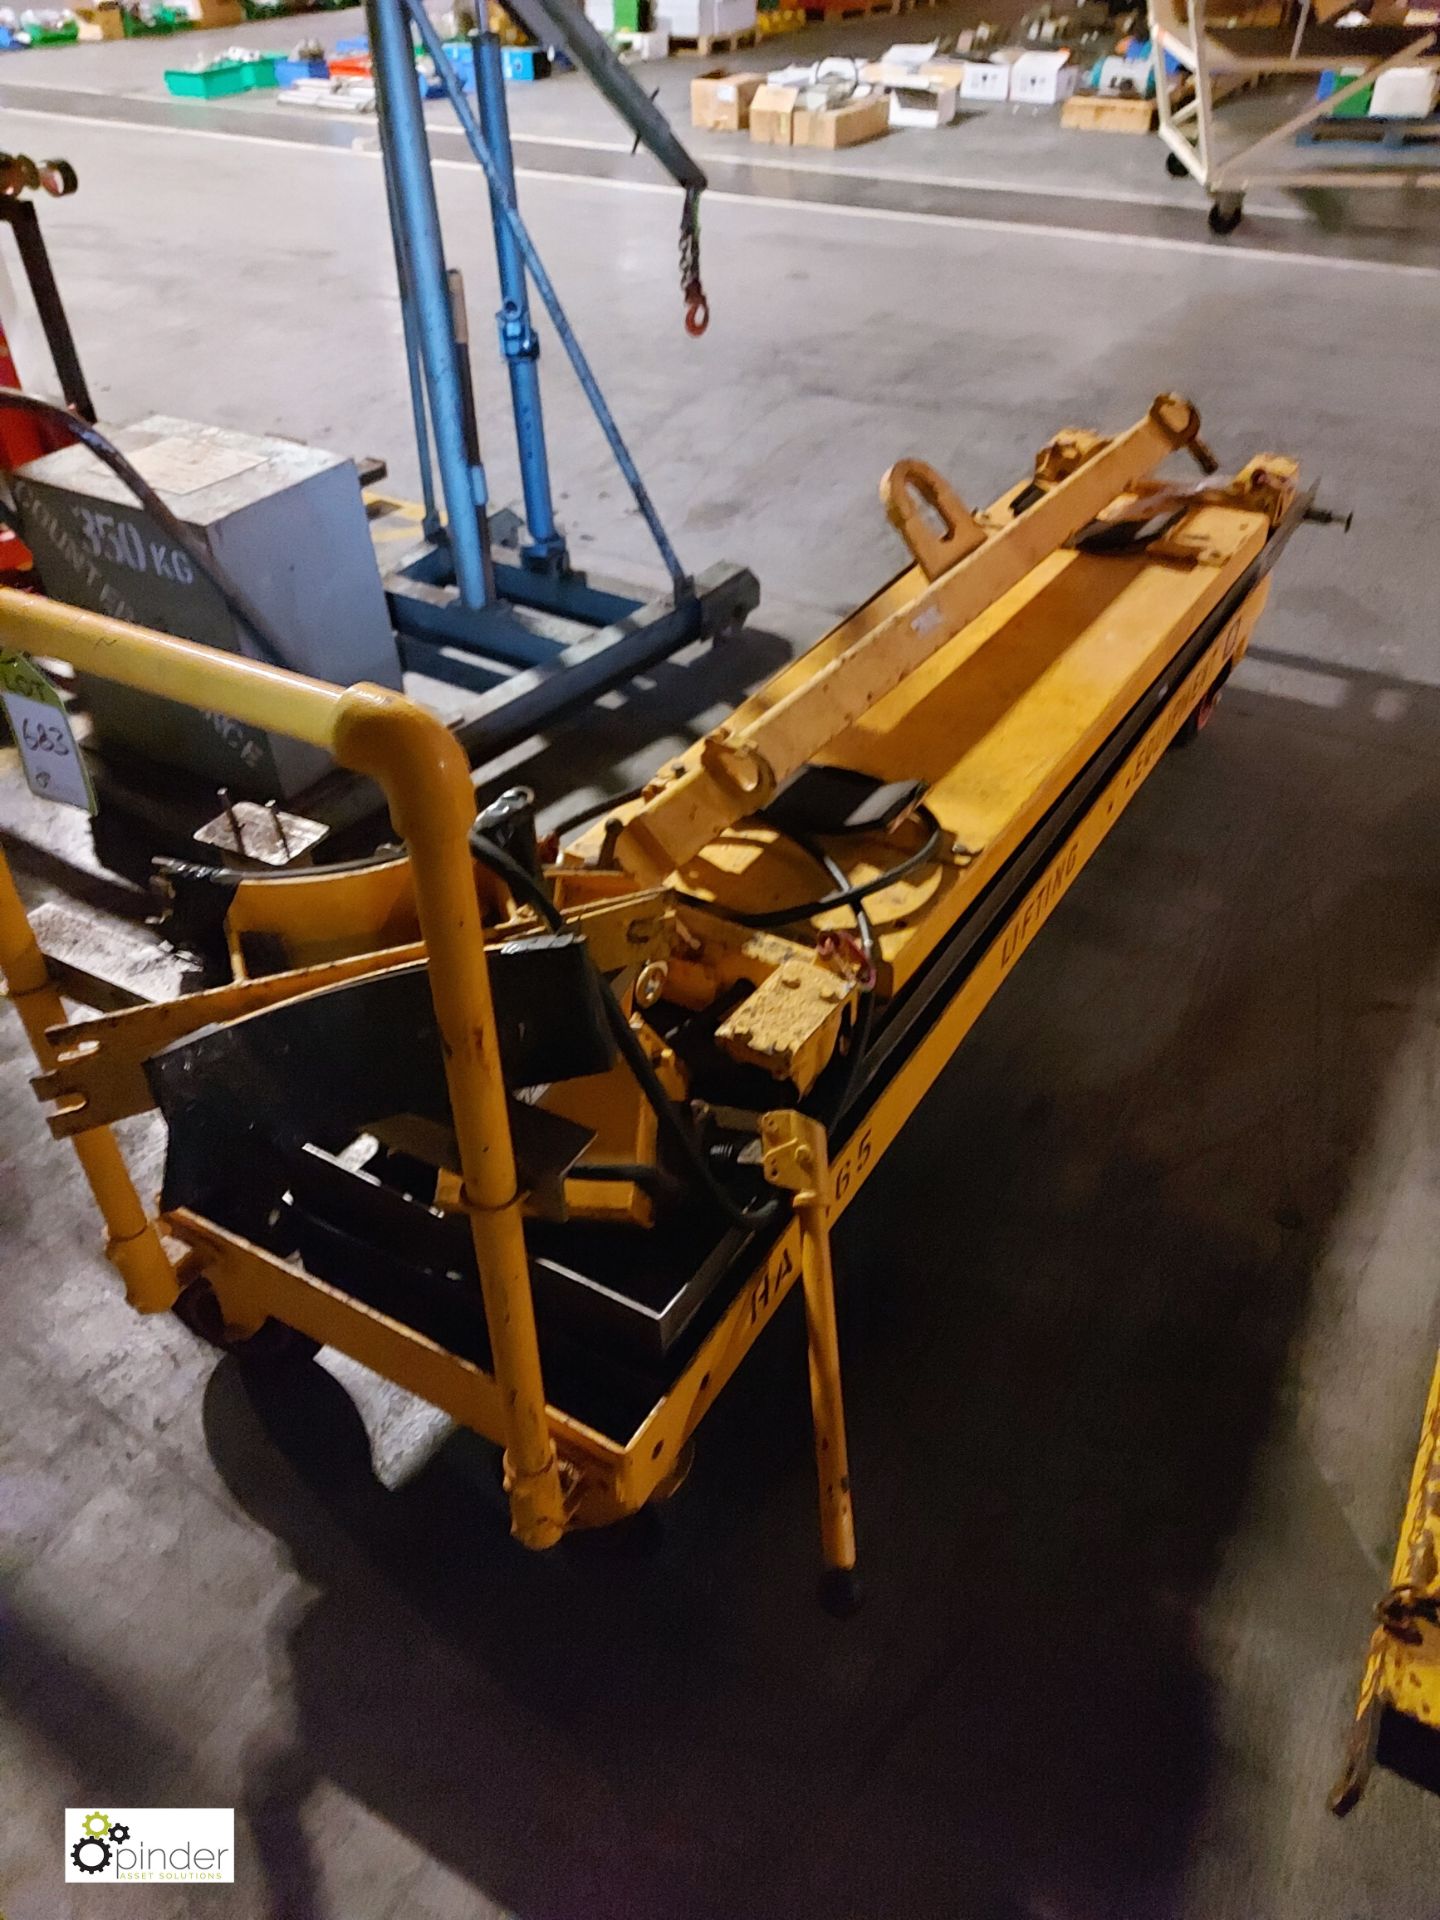 4-wheel steel Roller Removal Scissor Lift Cart and Lifting Beam (please note there is a lift out fee